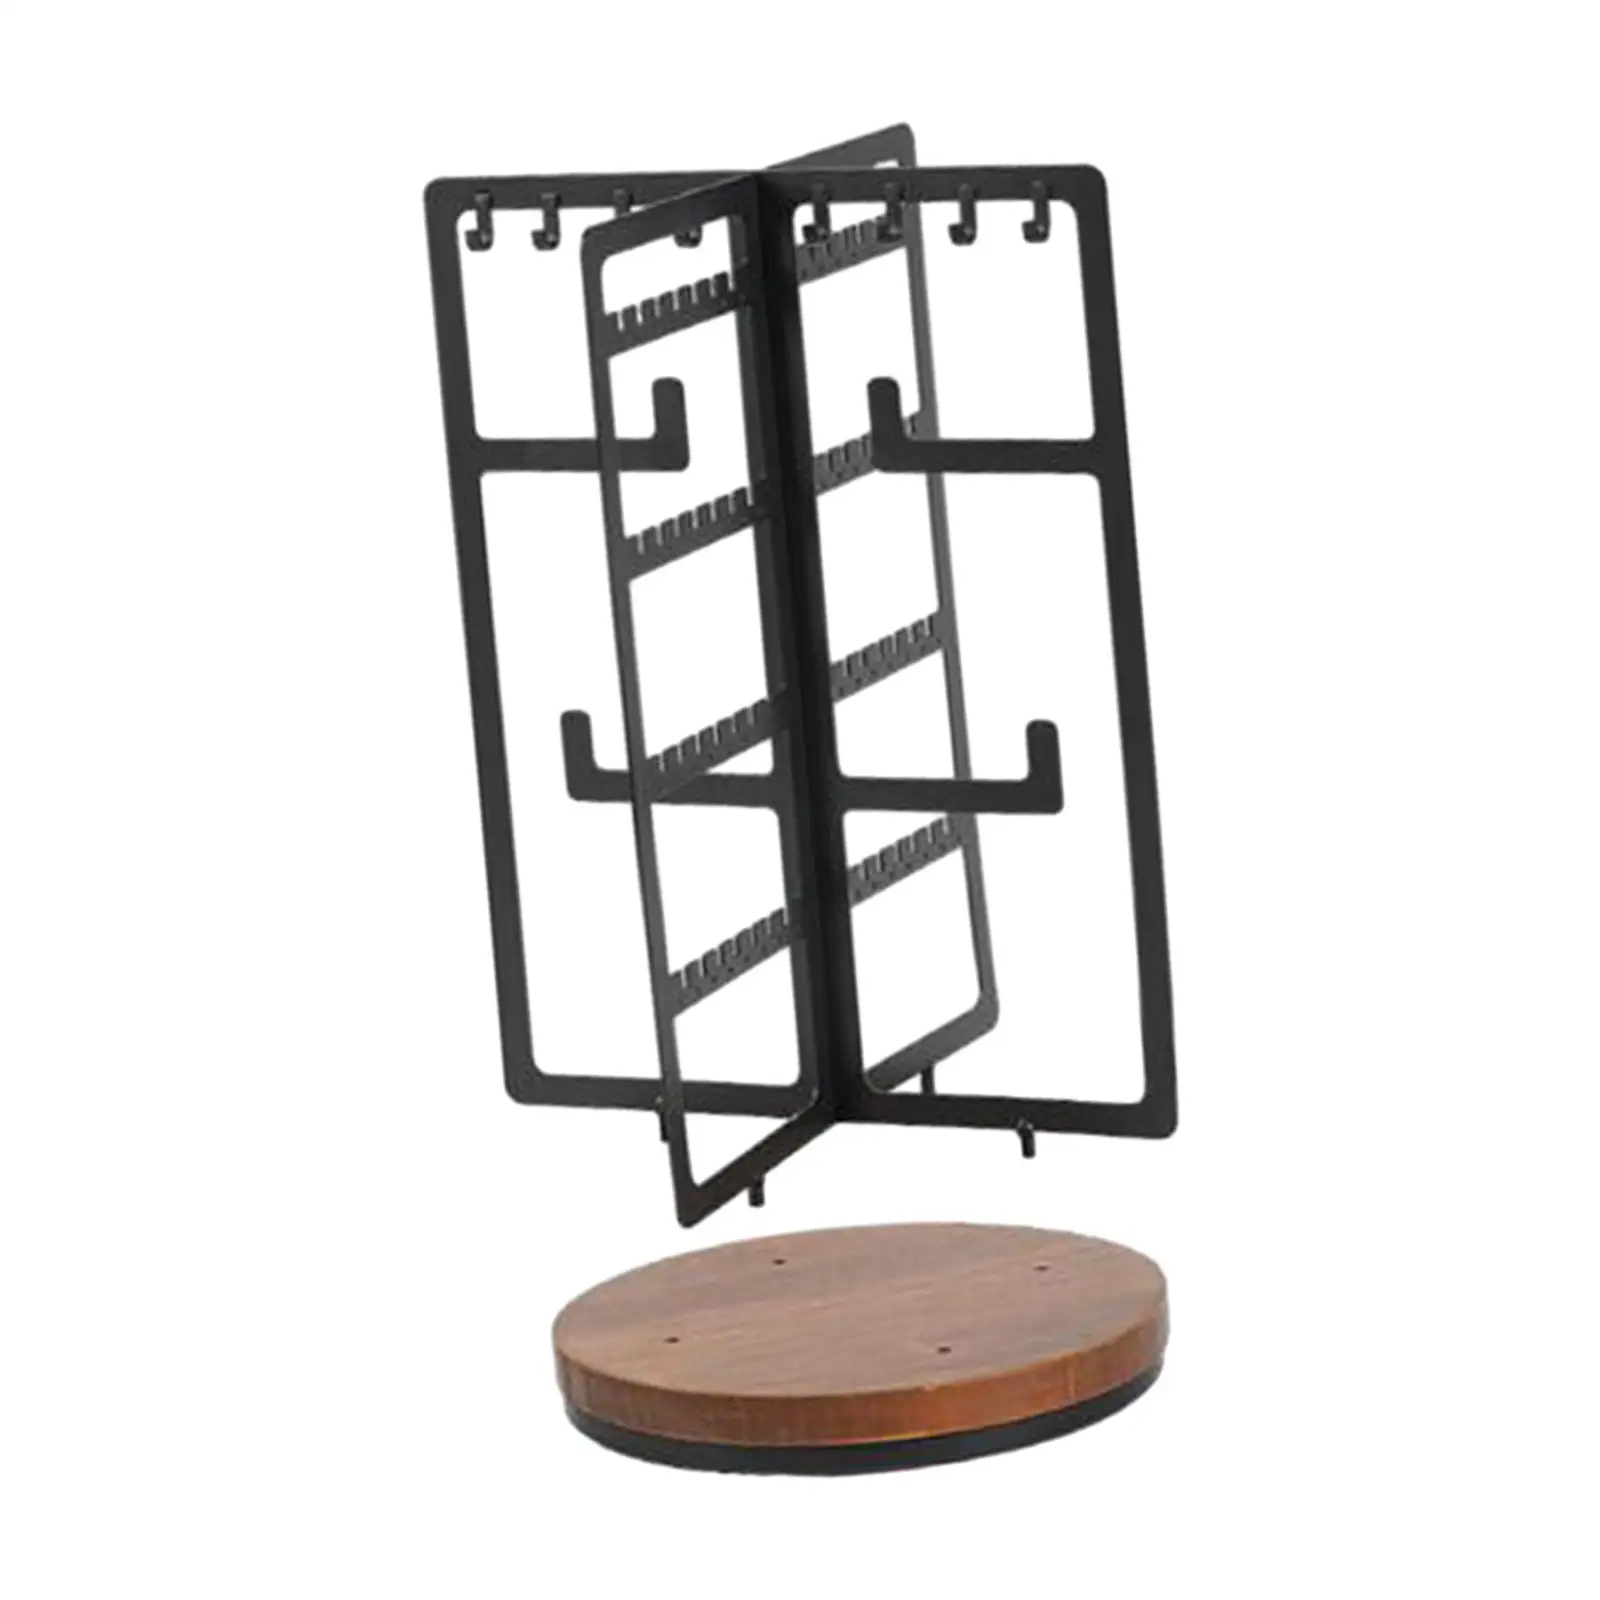 Jewelry Holder Organizer Rotatable for Necklaces Bracelets Display Stand for Shop Showcase Dresser Mall Exhibition Retail Store